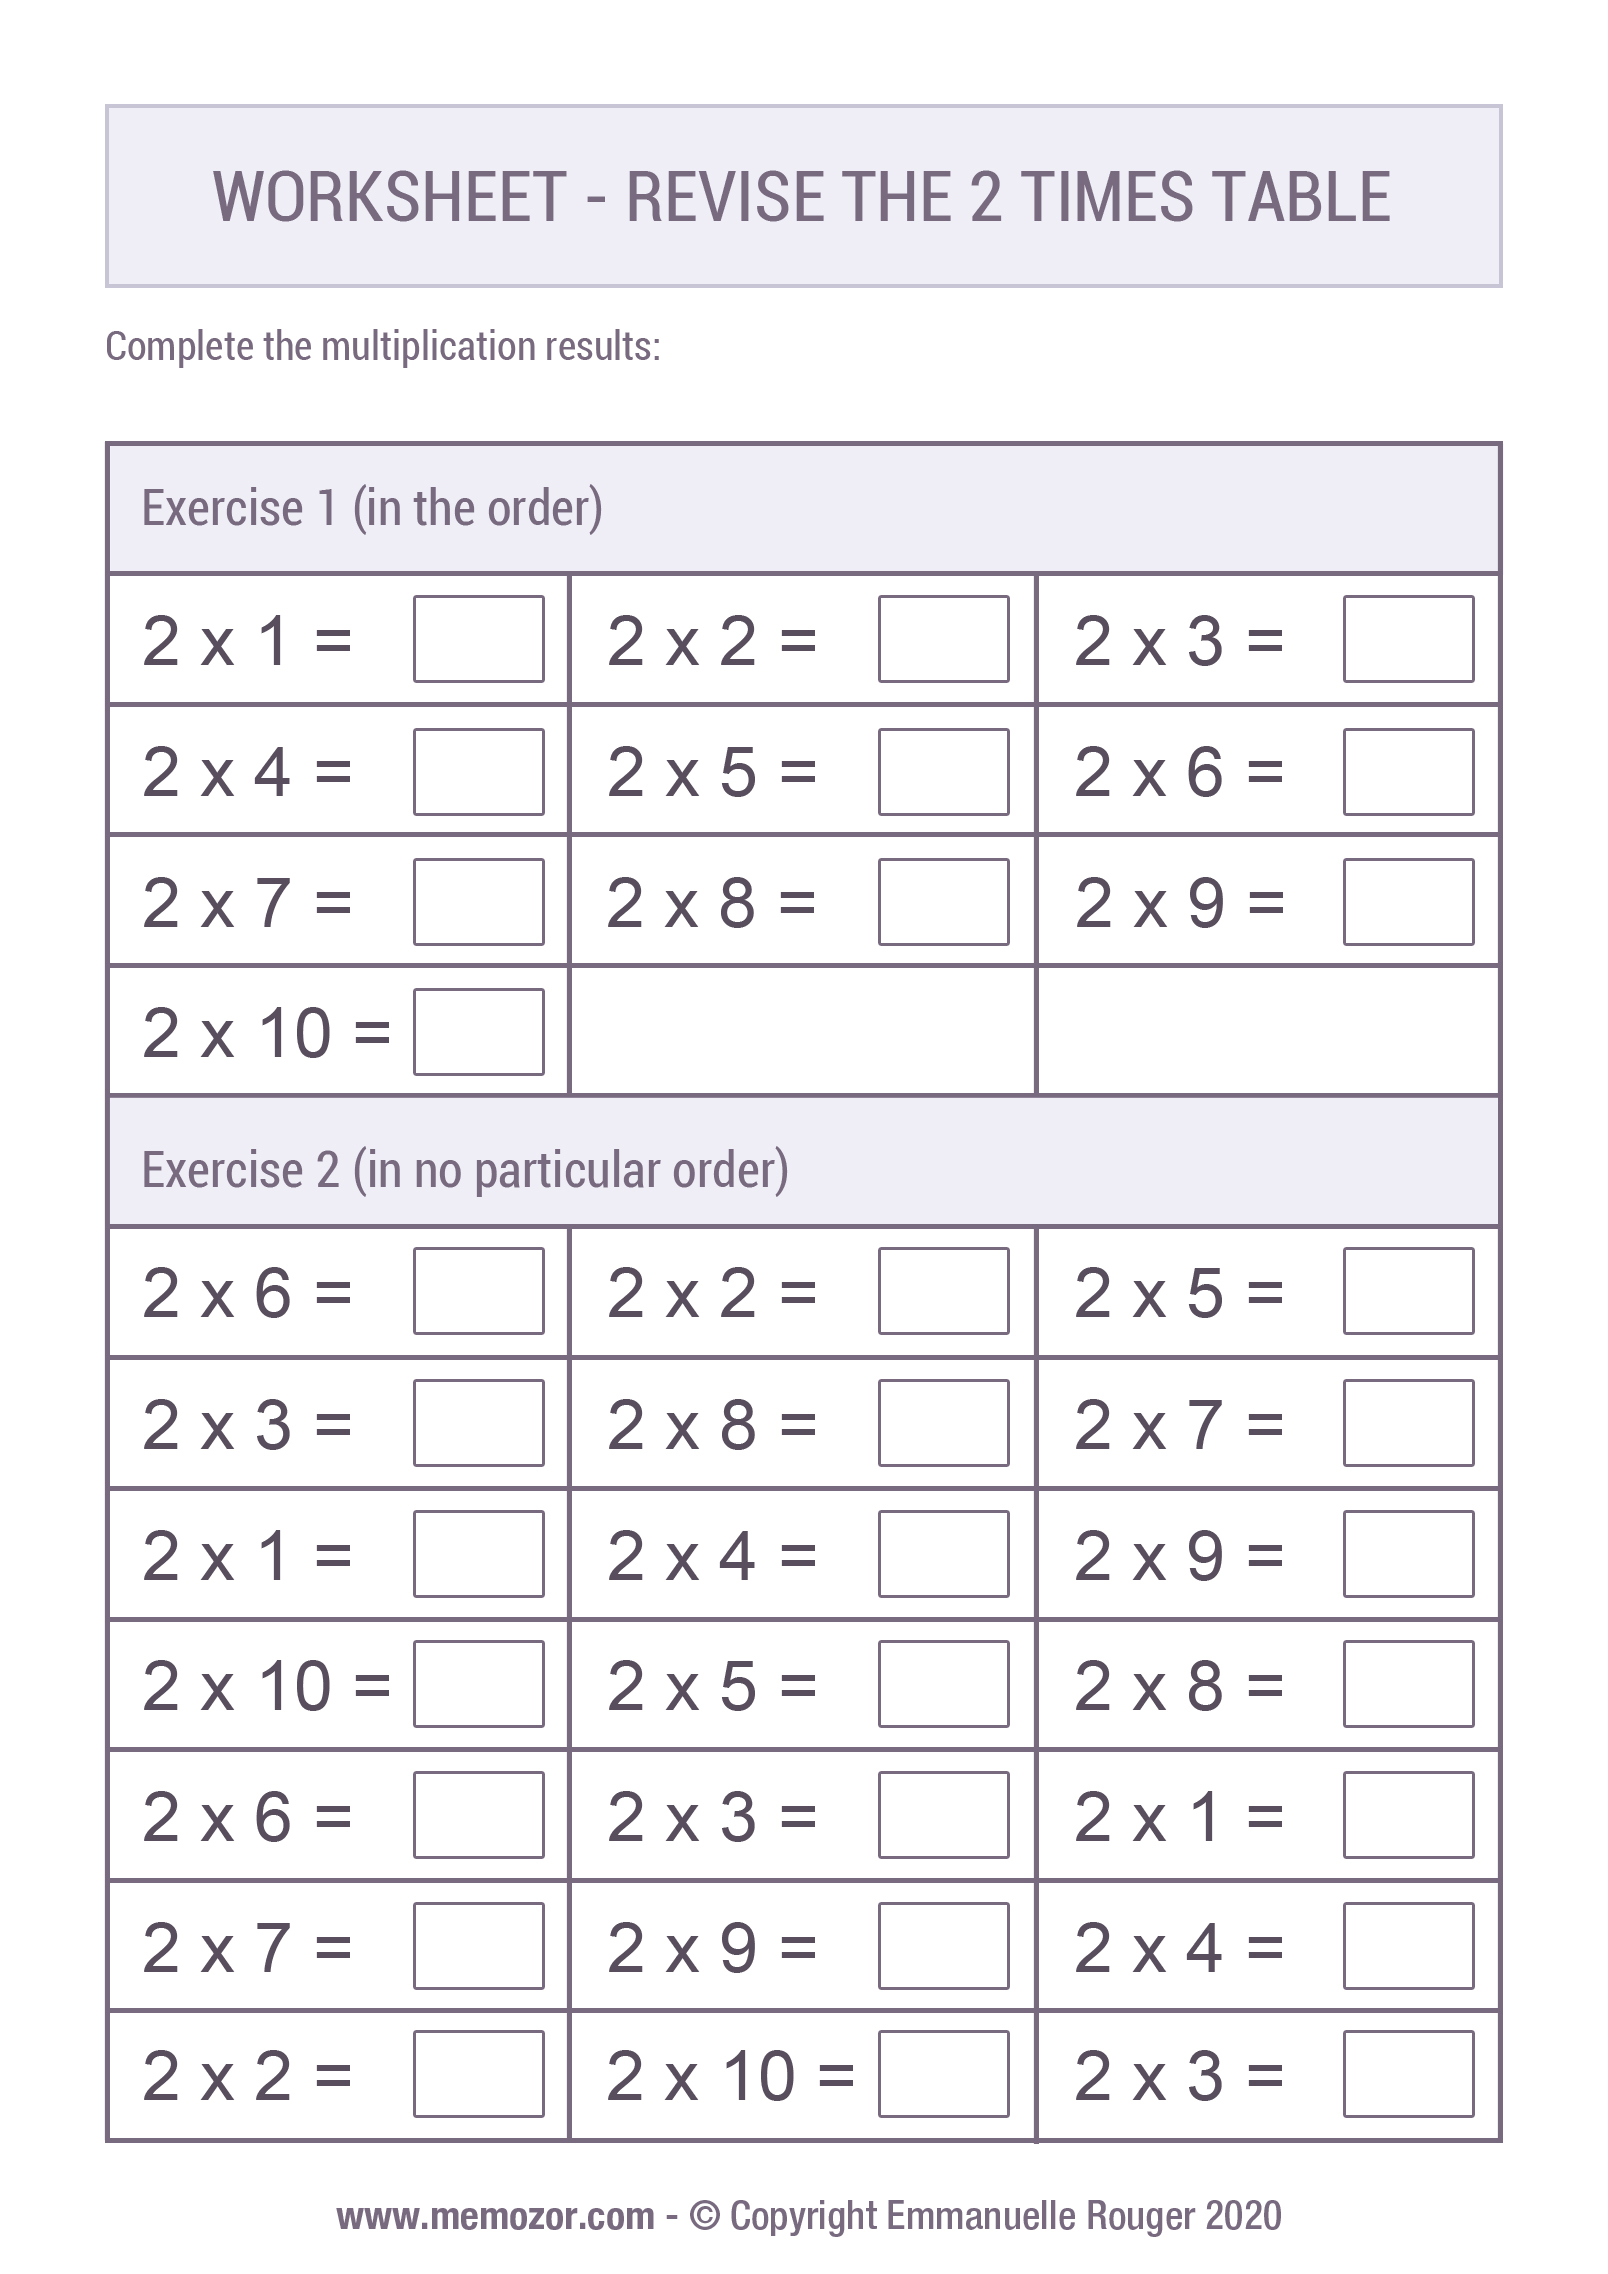 Printable Worksheet - Revise the 20 Times table  Memozor For 2 Times Table Worksheet